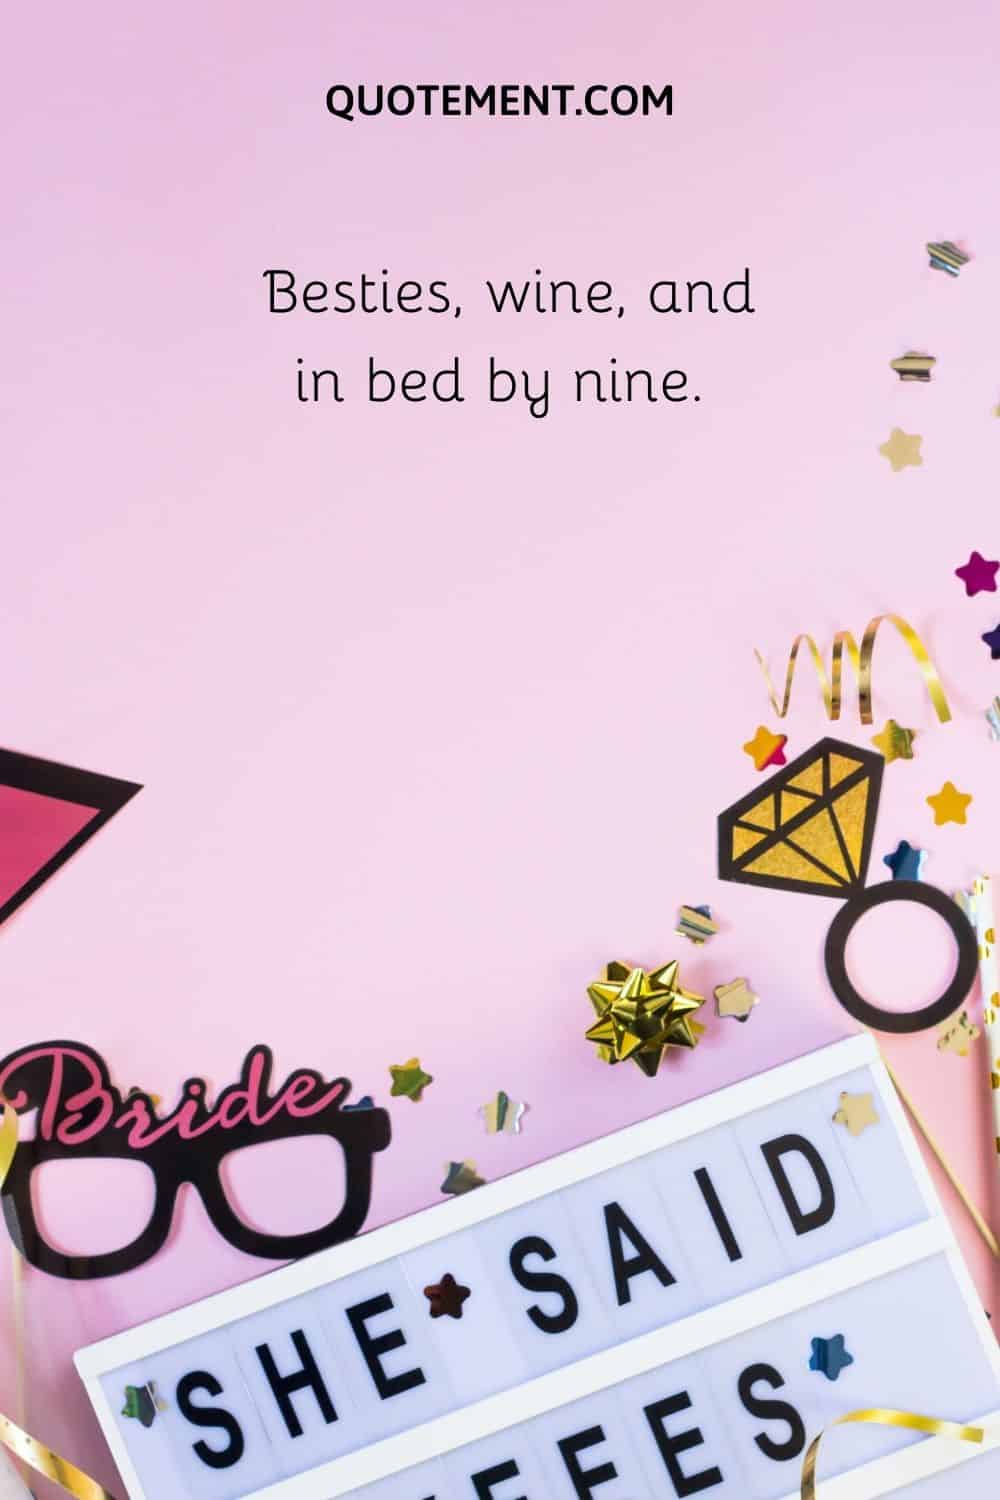 Besties, wine, and in bed by nine.